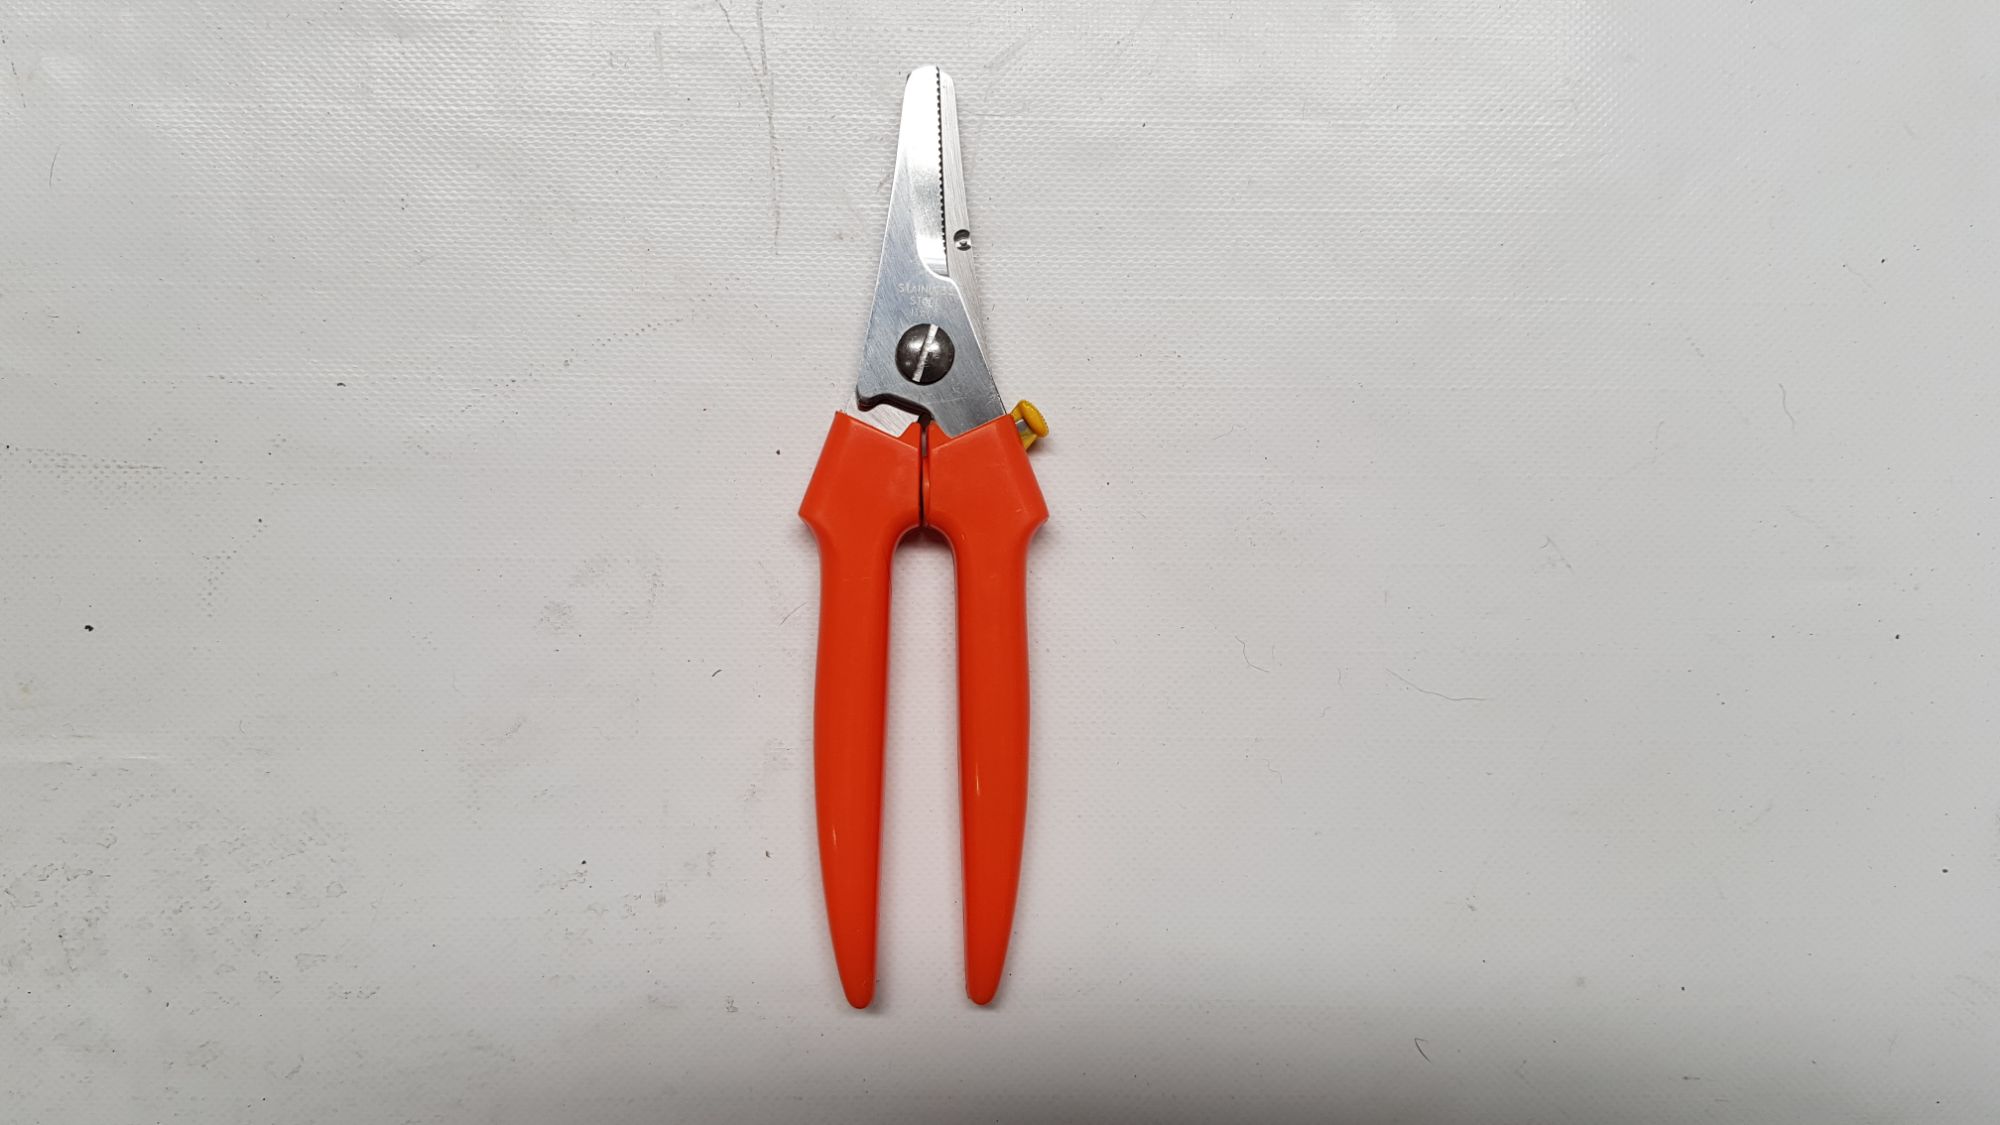 Italian Stainless Steel Combi Fishing Cutters For Sale in Perth, Western Australia